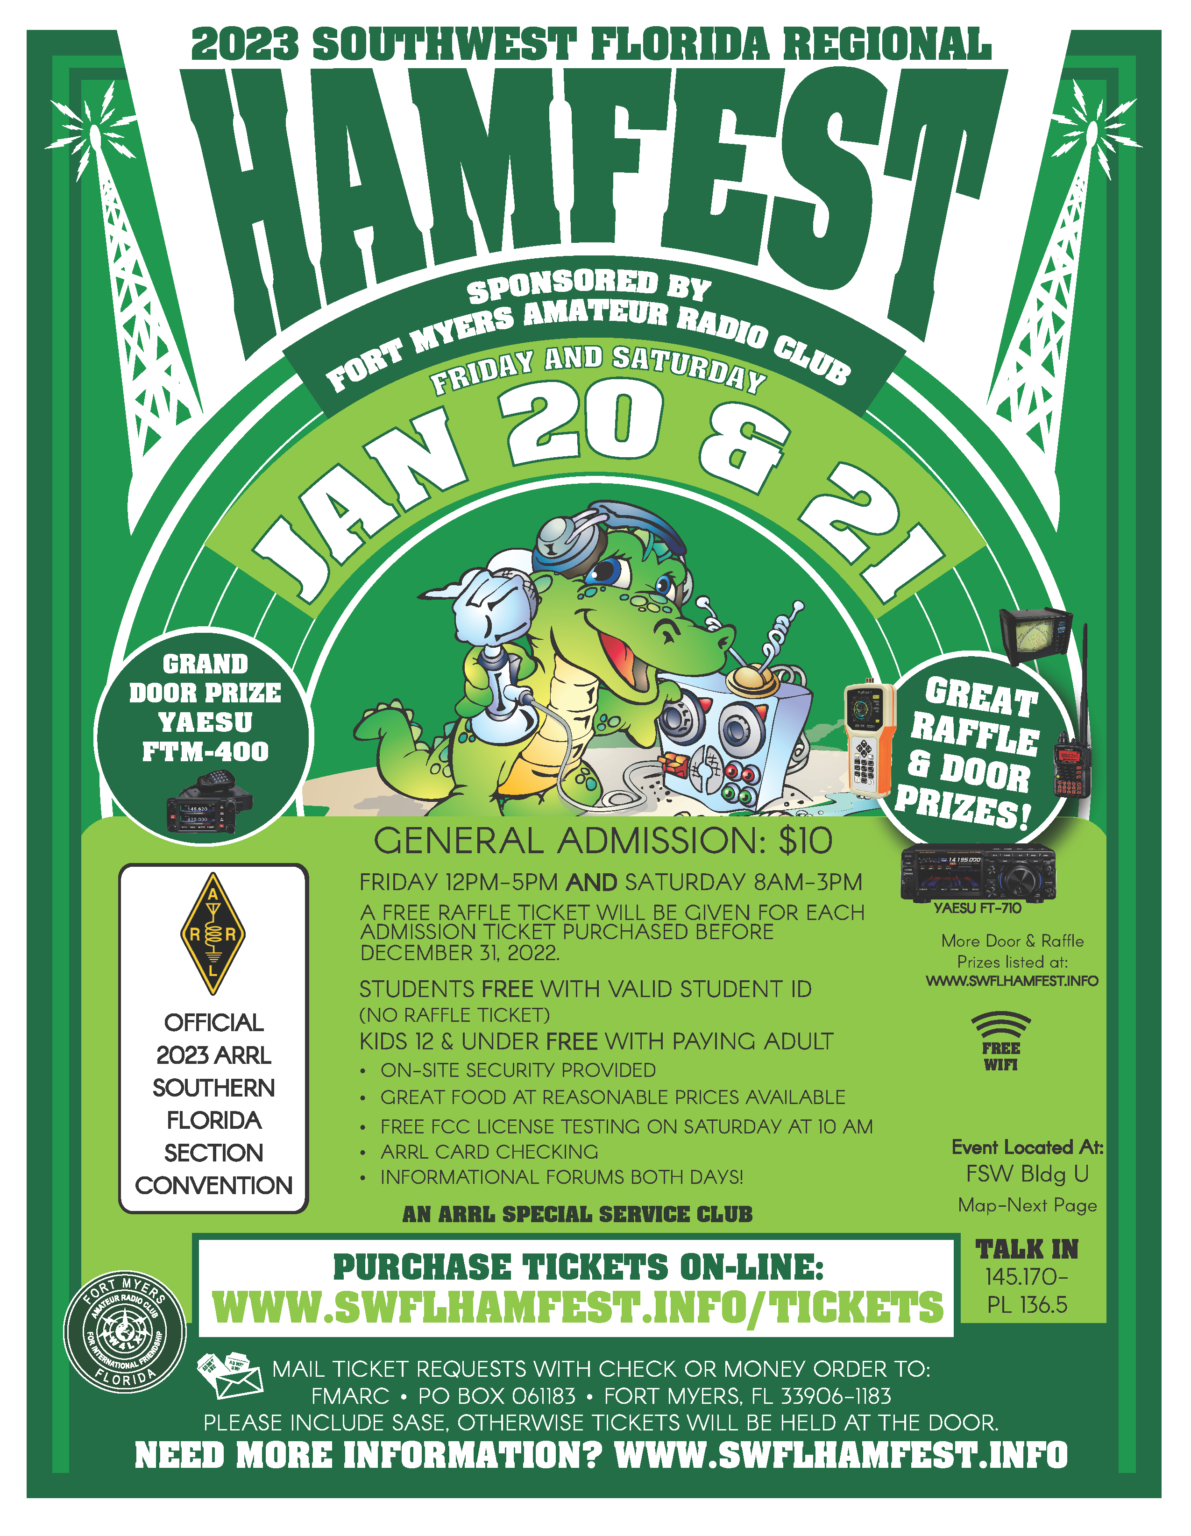 SWFL-Hamfest-2023-Flyer_Page_1-1191x1536.png